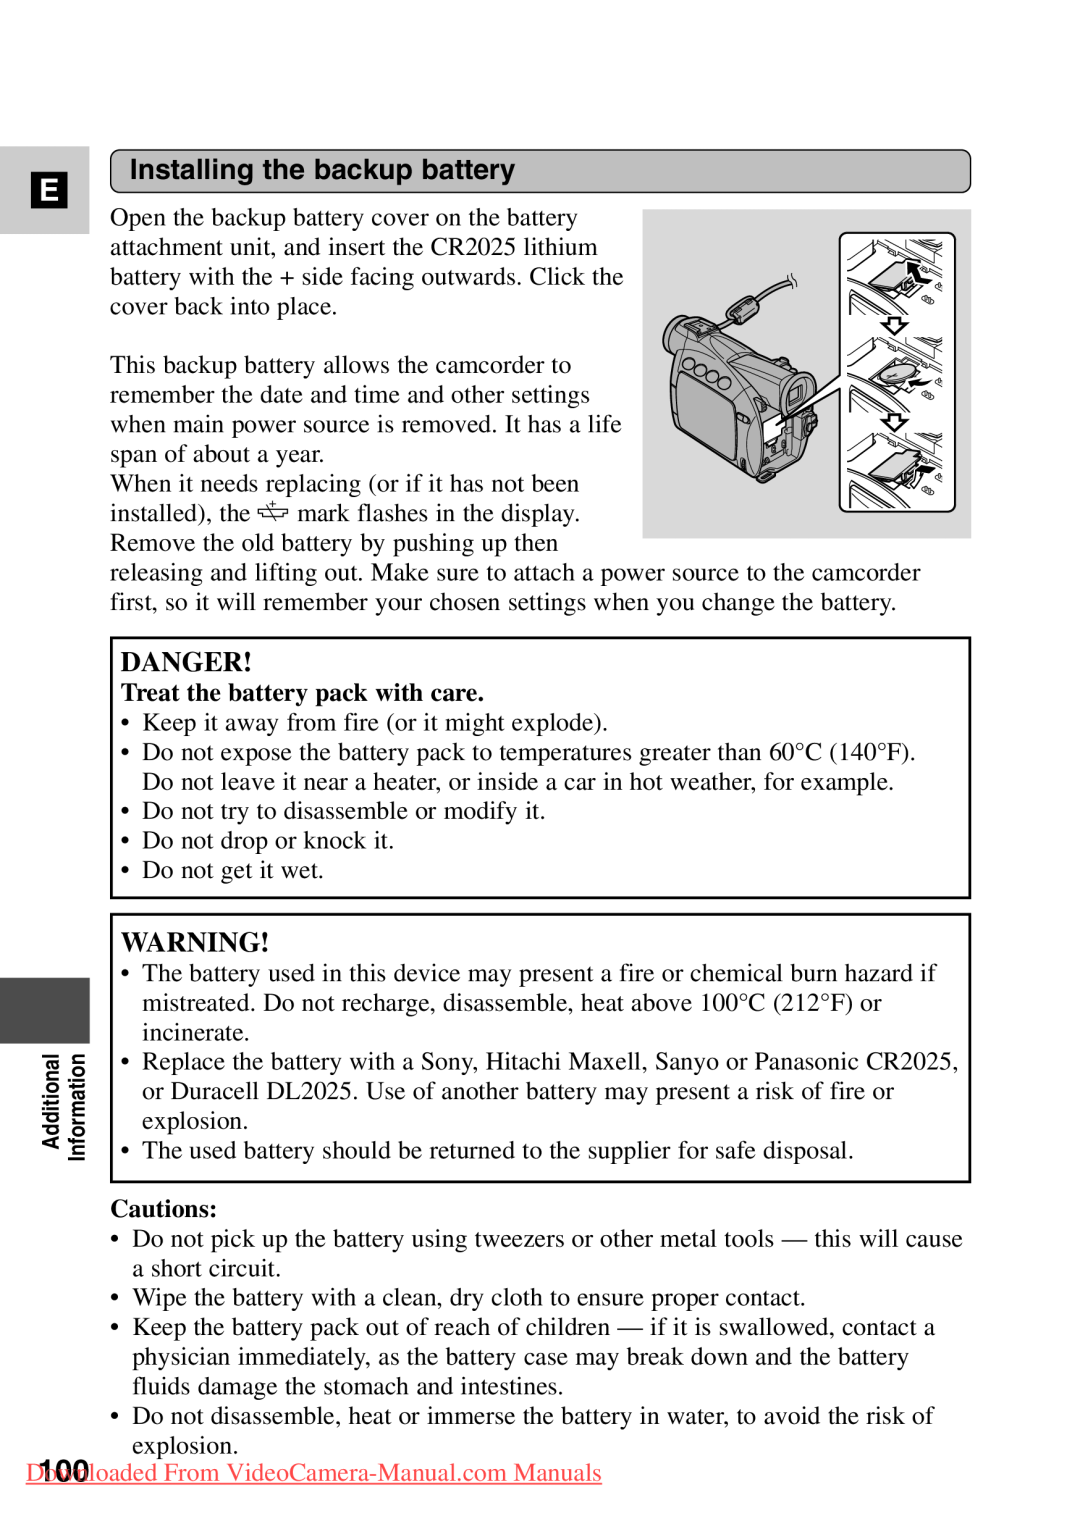 Canon MV500i, 7561A001 instruction manual Installing the backup battery, Danger, Treat the battery pack with care, Cautions 